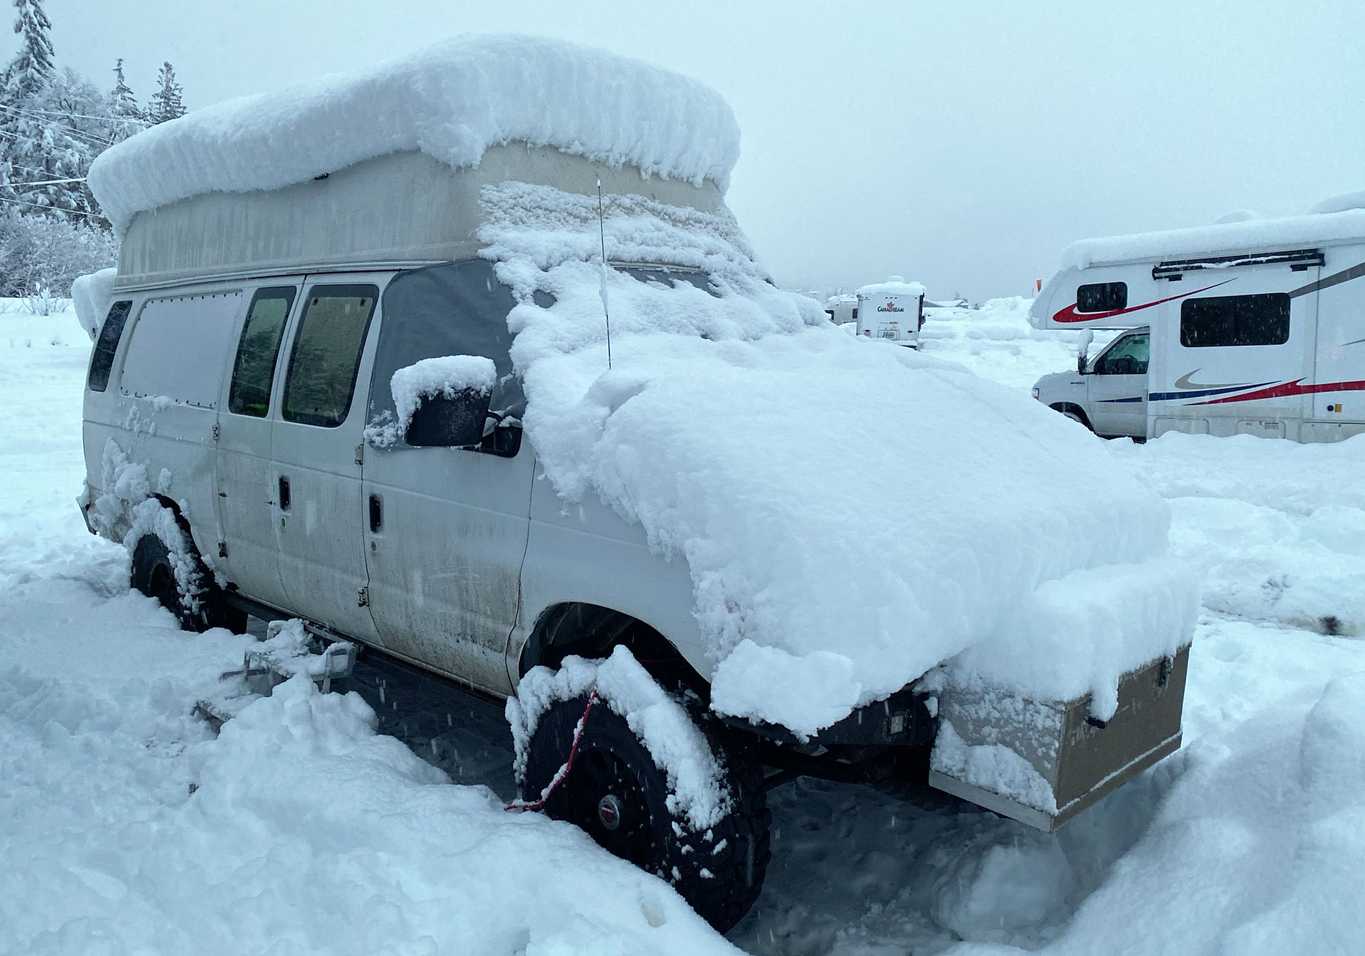 Snow piled up on our van after a big storm in the Revelstoke parking lot